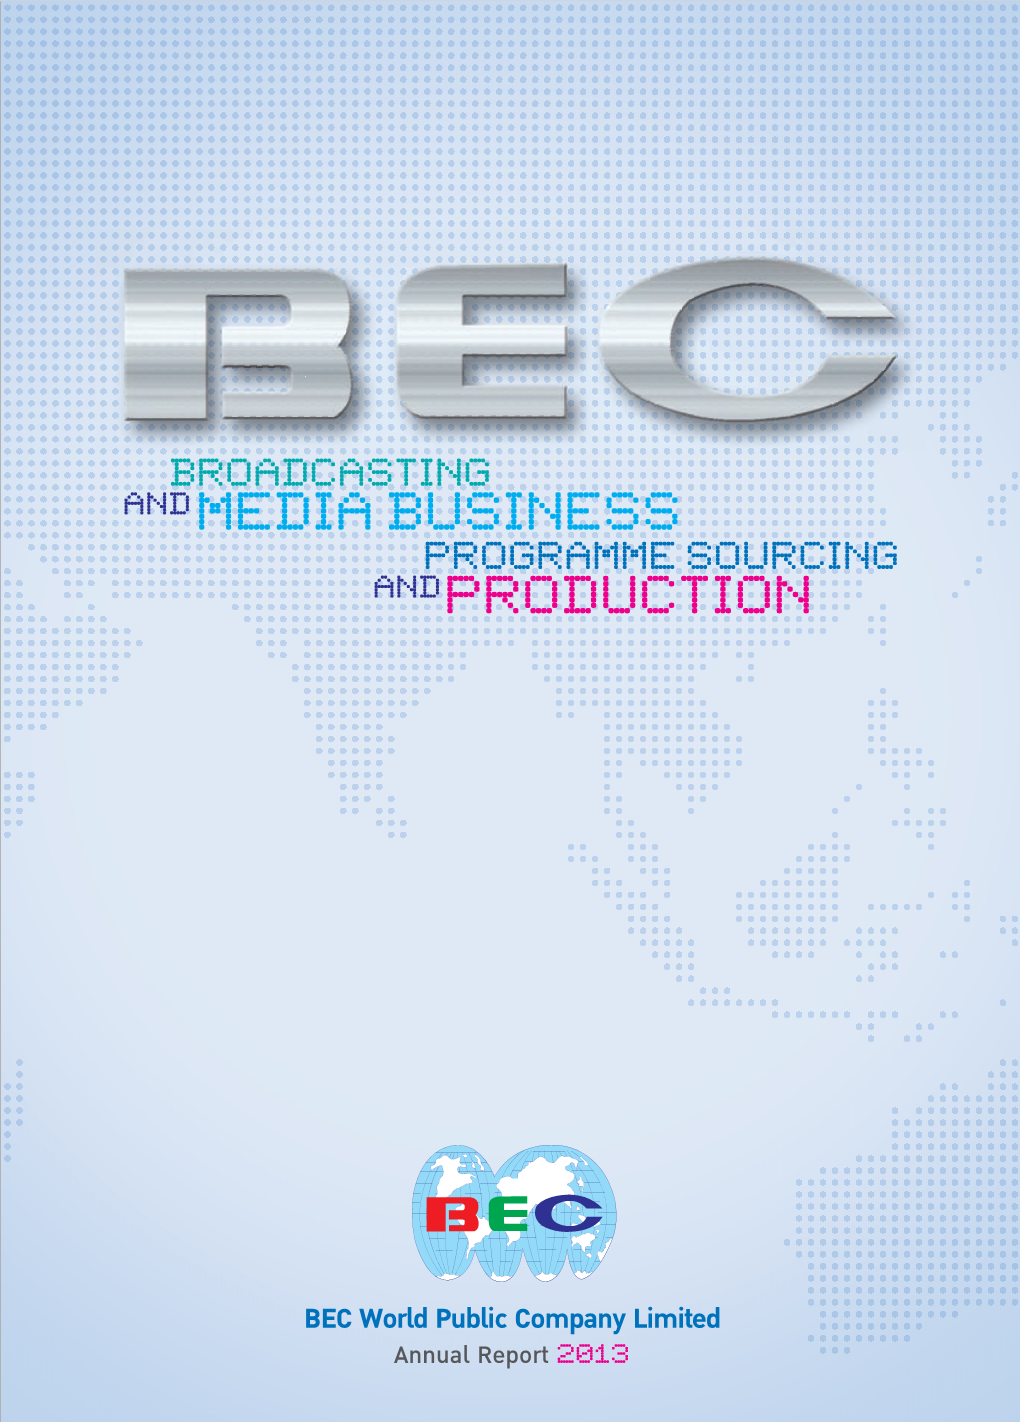 BEC: Bec World Public Company Limited | Annual Report 2013